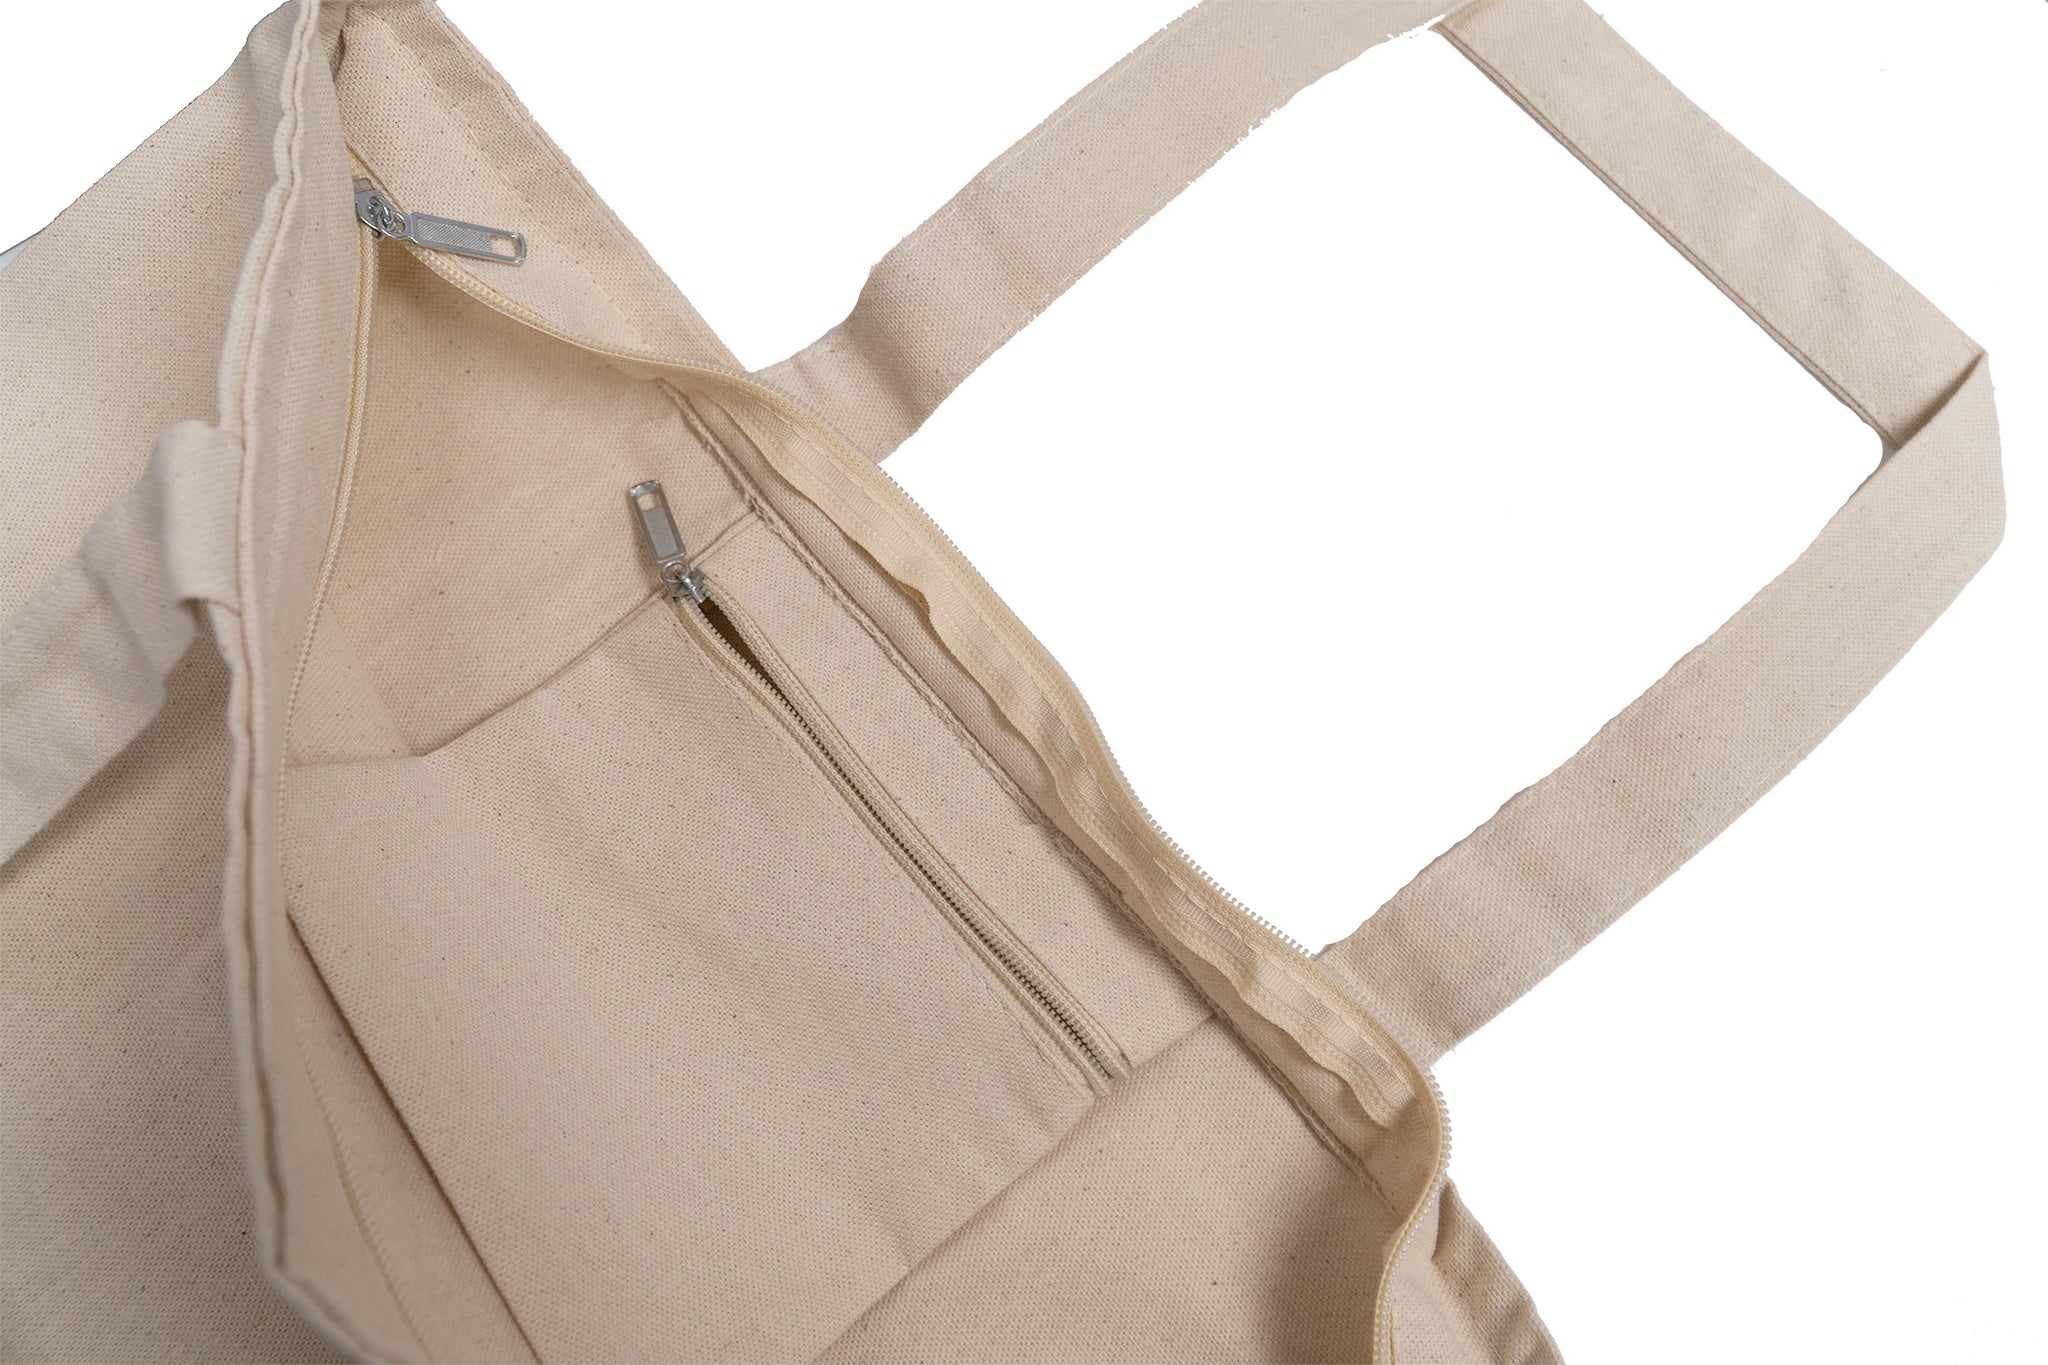 Day canvas tote bag with inside pocket 